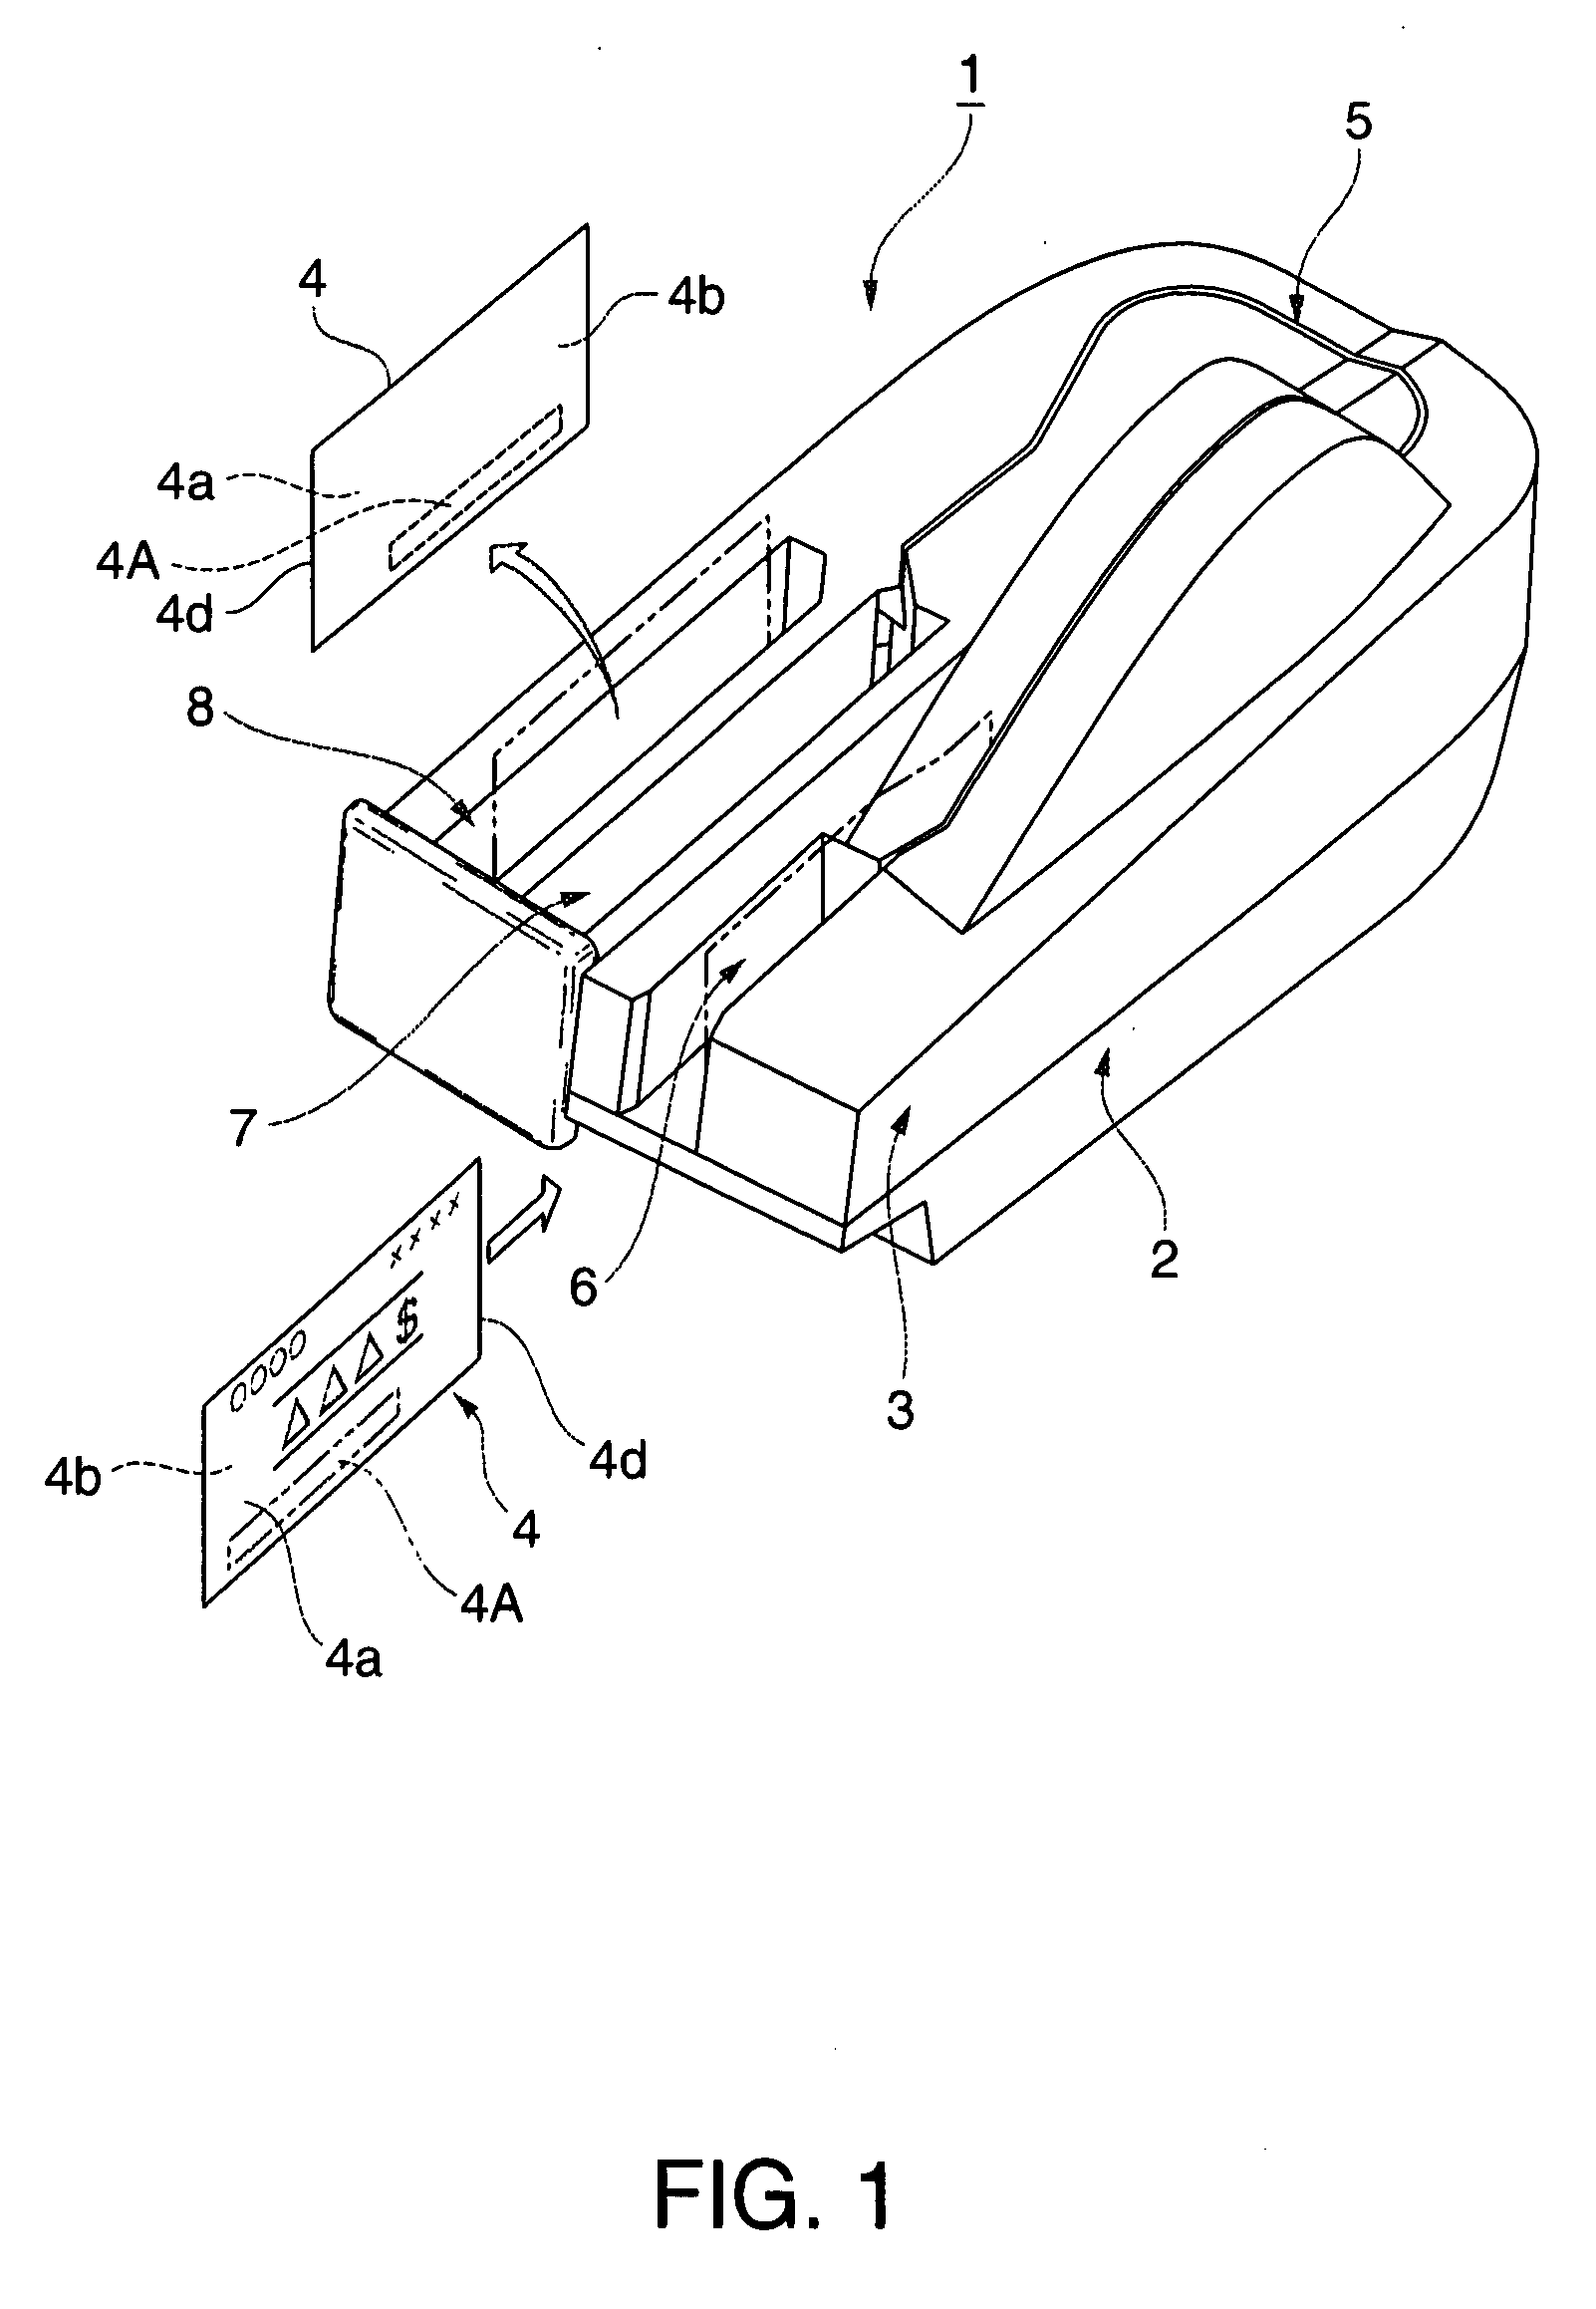 Processing method and apparatus for recording media having printed magnetic ink characters